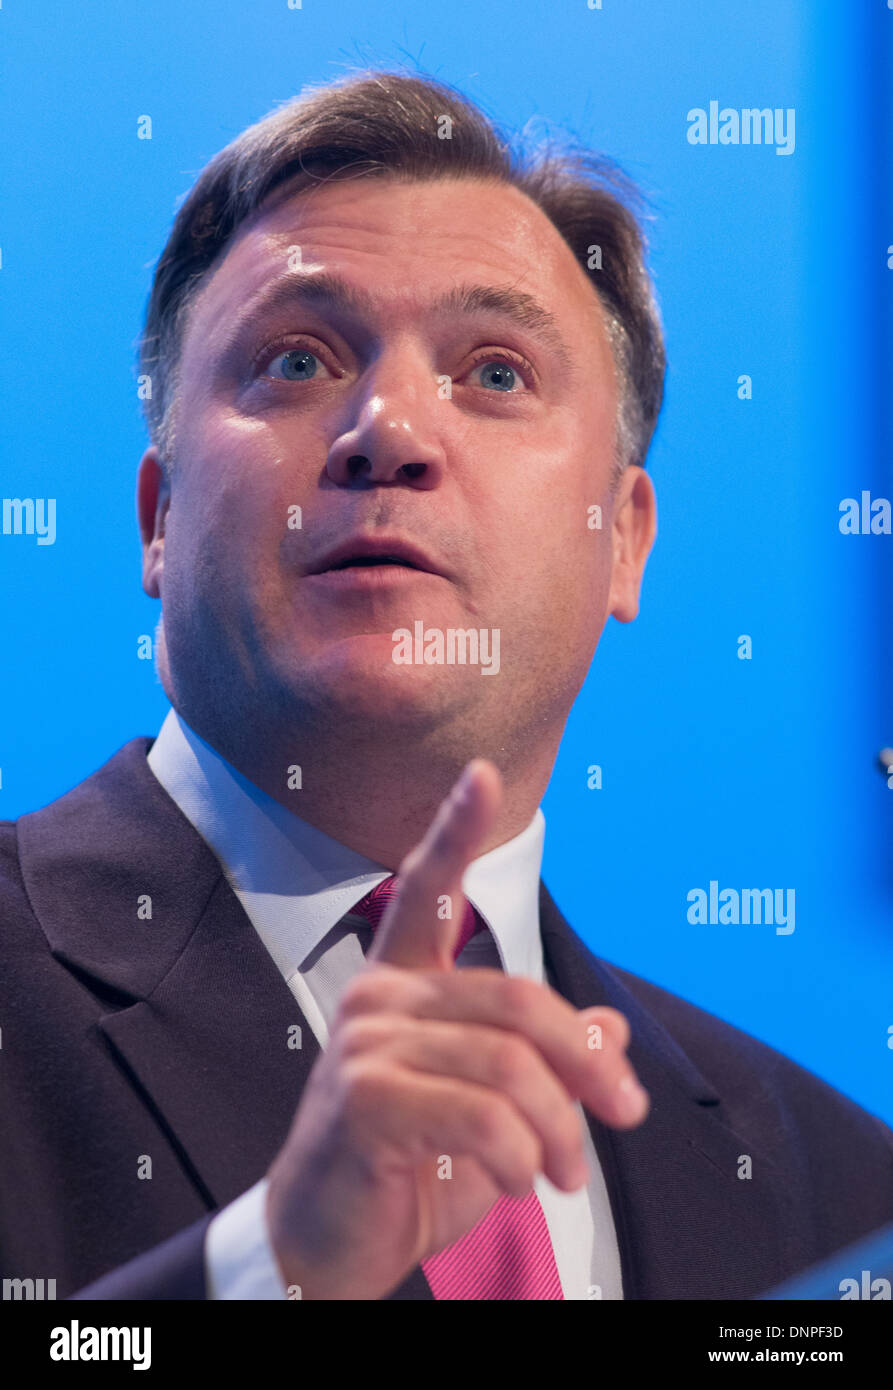 Ed Balls-Shadow Chancellor of the Exchequer Labour MP for Morley and Outwood speaking at the Labour Party conference Stock Photo